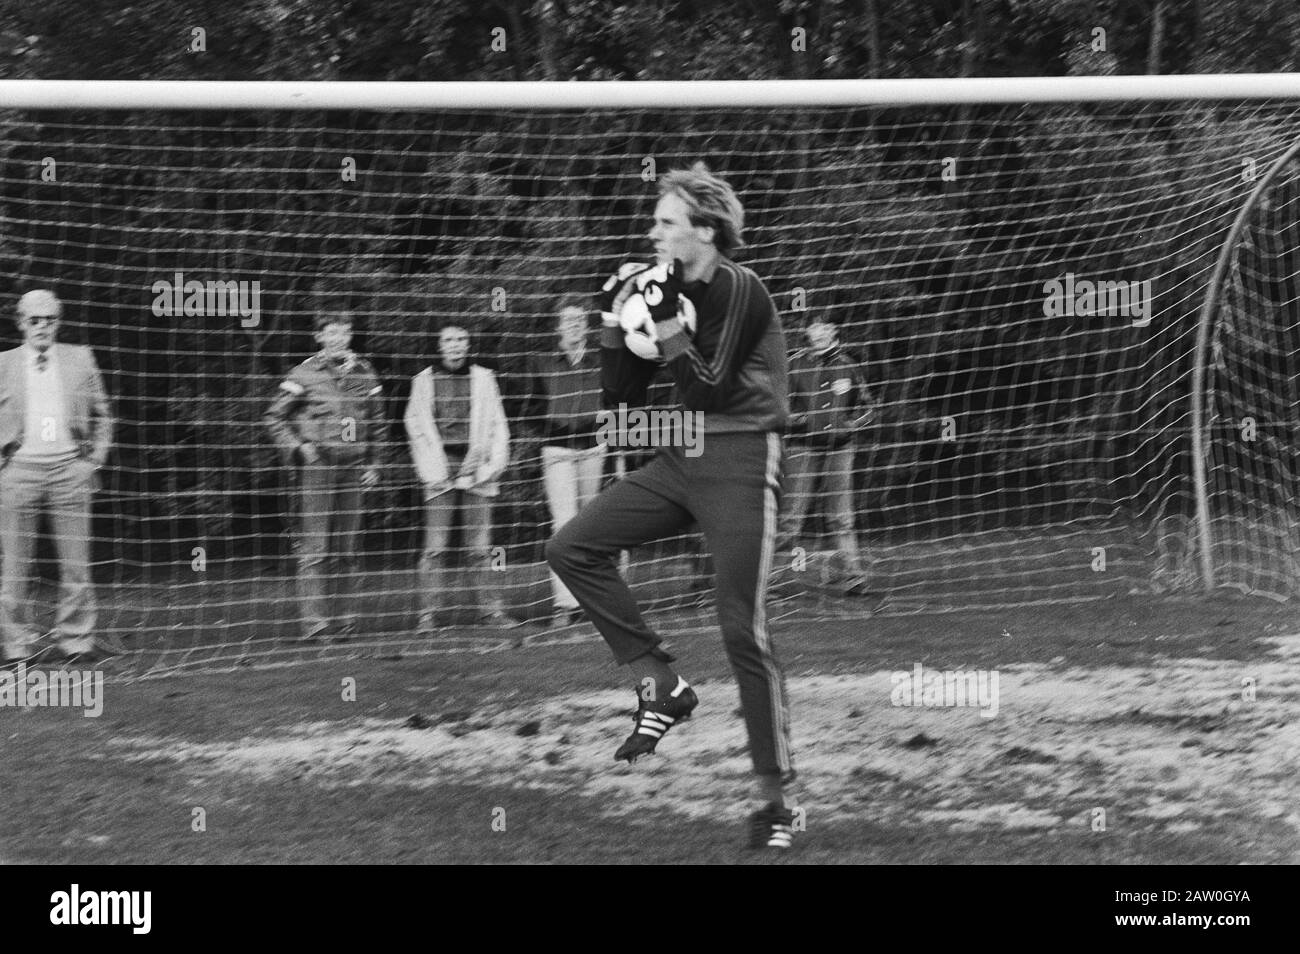 Dutch squad trained this afternoon in Zeist i.v.m. match against West Germany goalkeeper Hans van Breukelen in training Date: October 9, 1980 Location: BRD, Germany, Zeist Keywords: teams, goalkeepers, sports, training, football Person Name: Hans van Breukelen Stock Photo